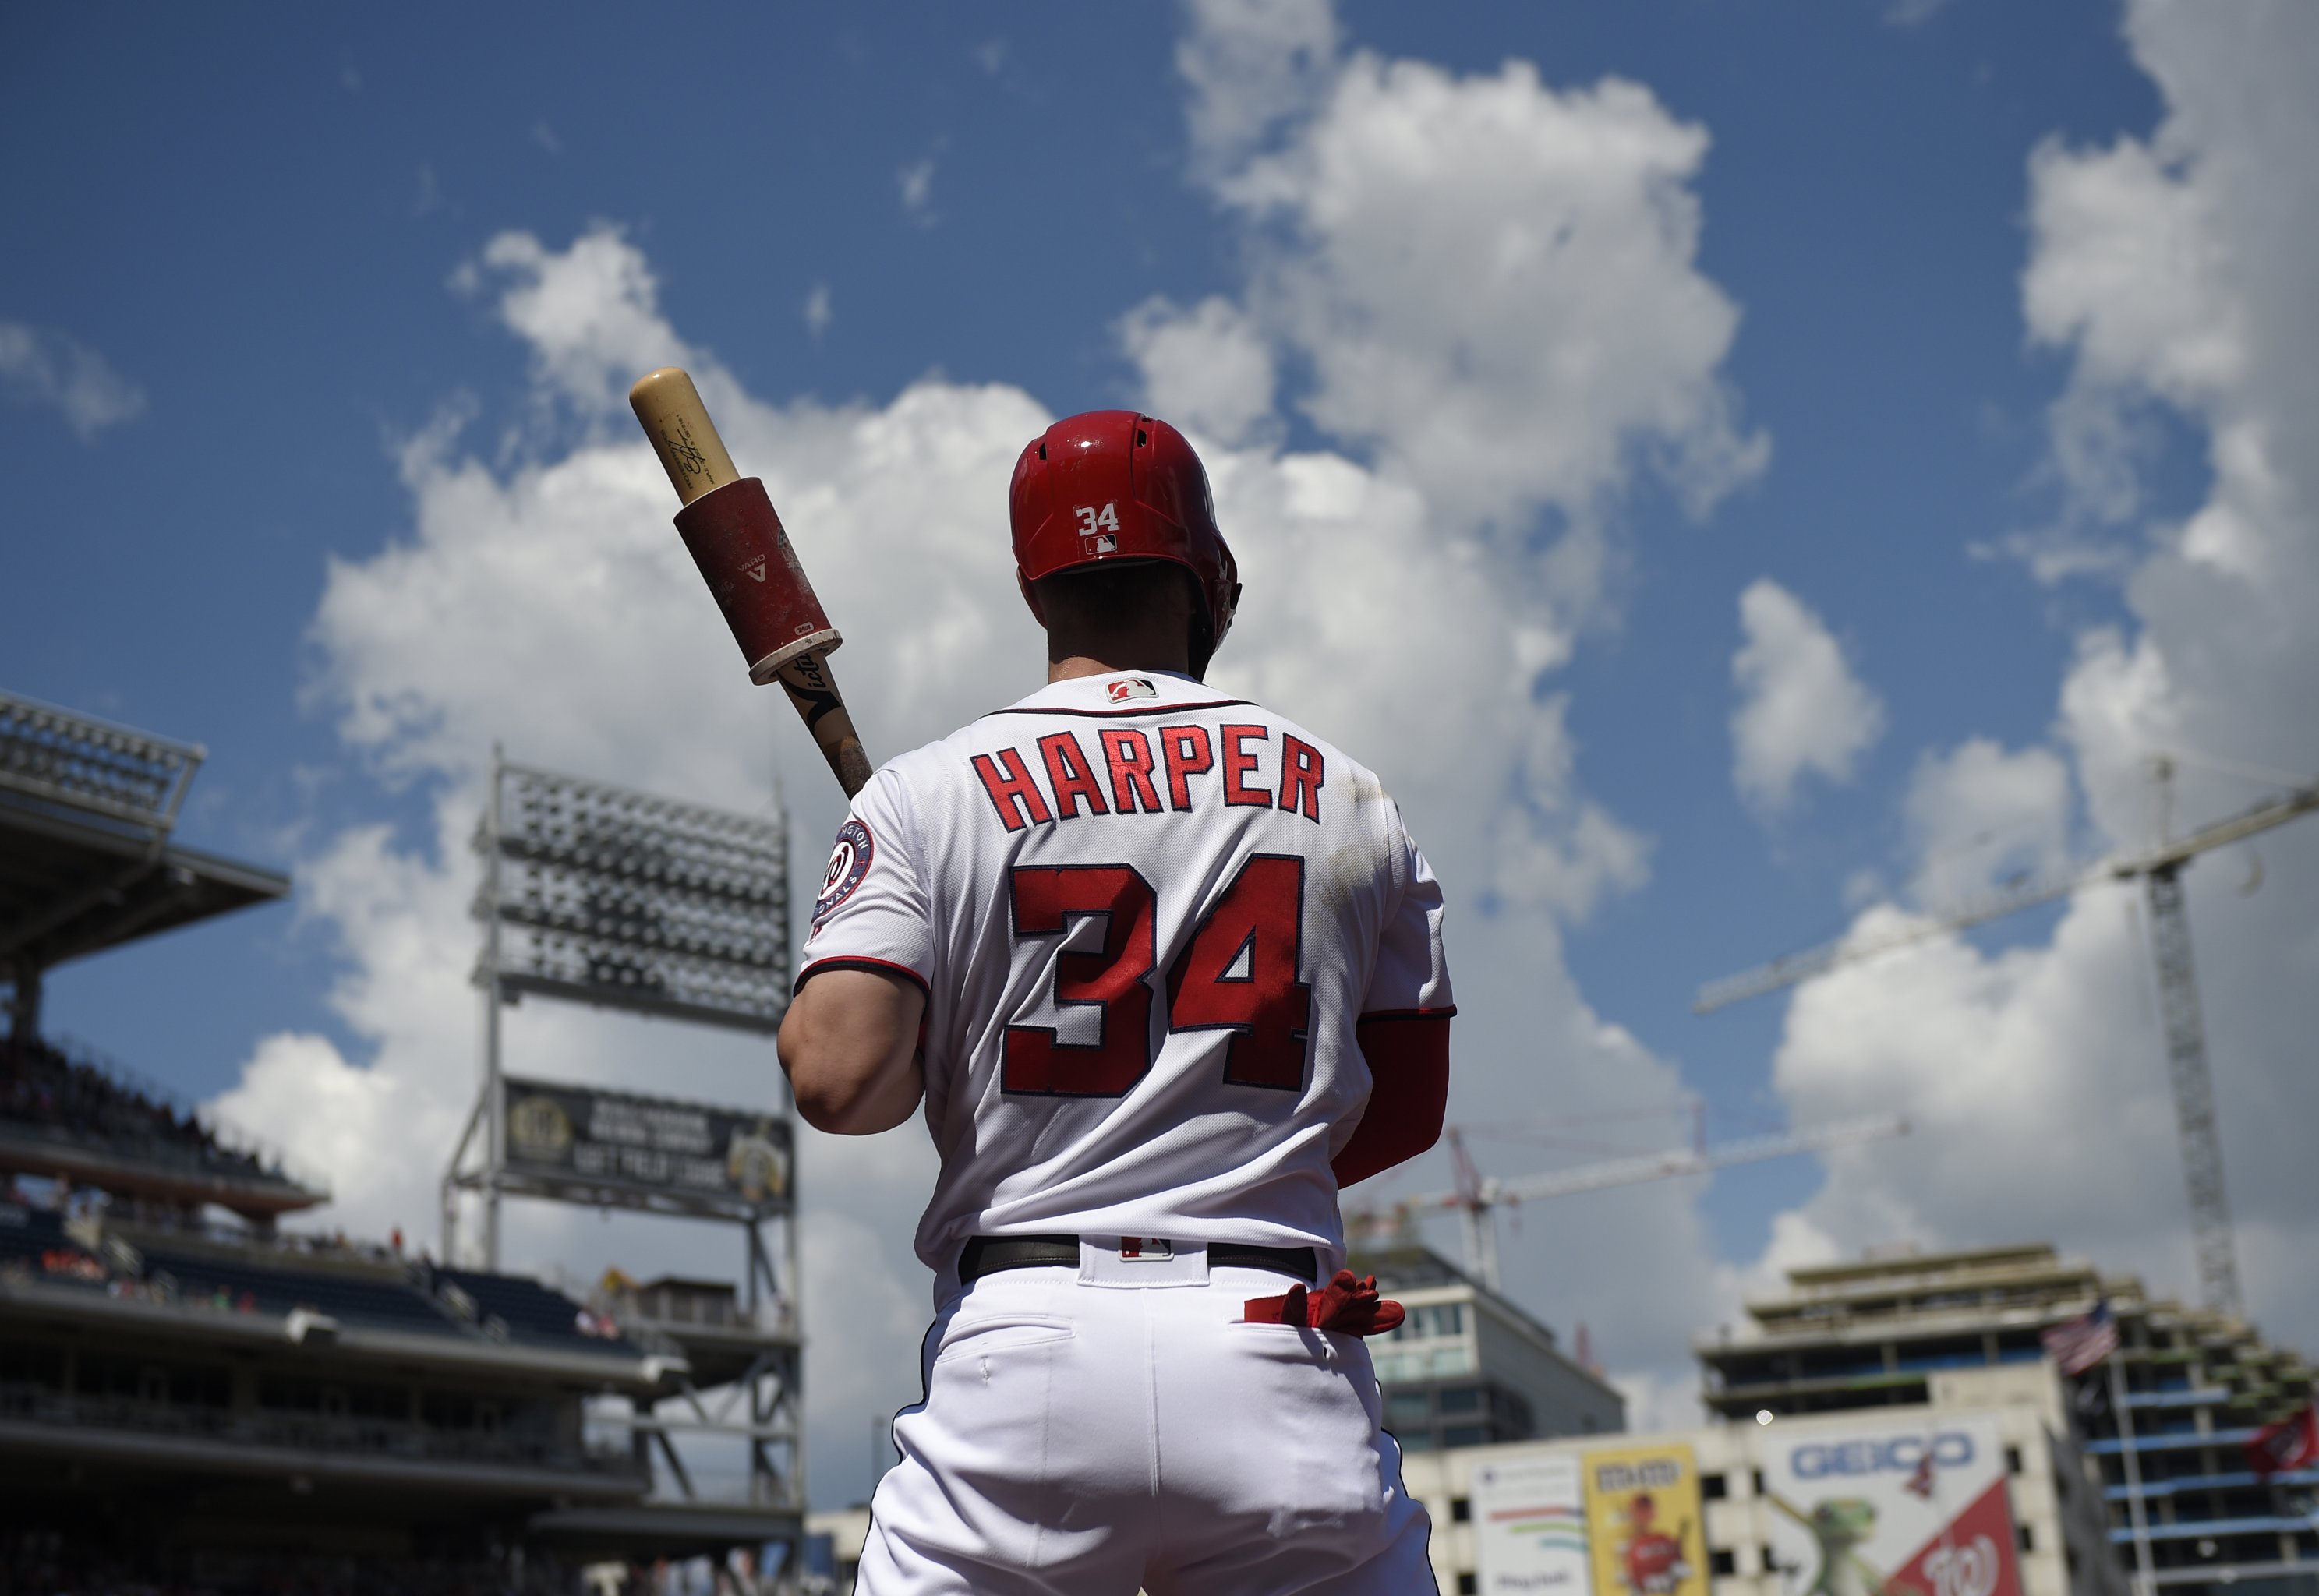 Las Vegas native Bryce Harper blasts A's relocation plans: 'I feel sorry  for the fans' 